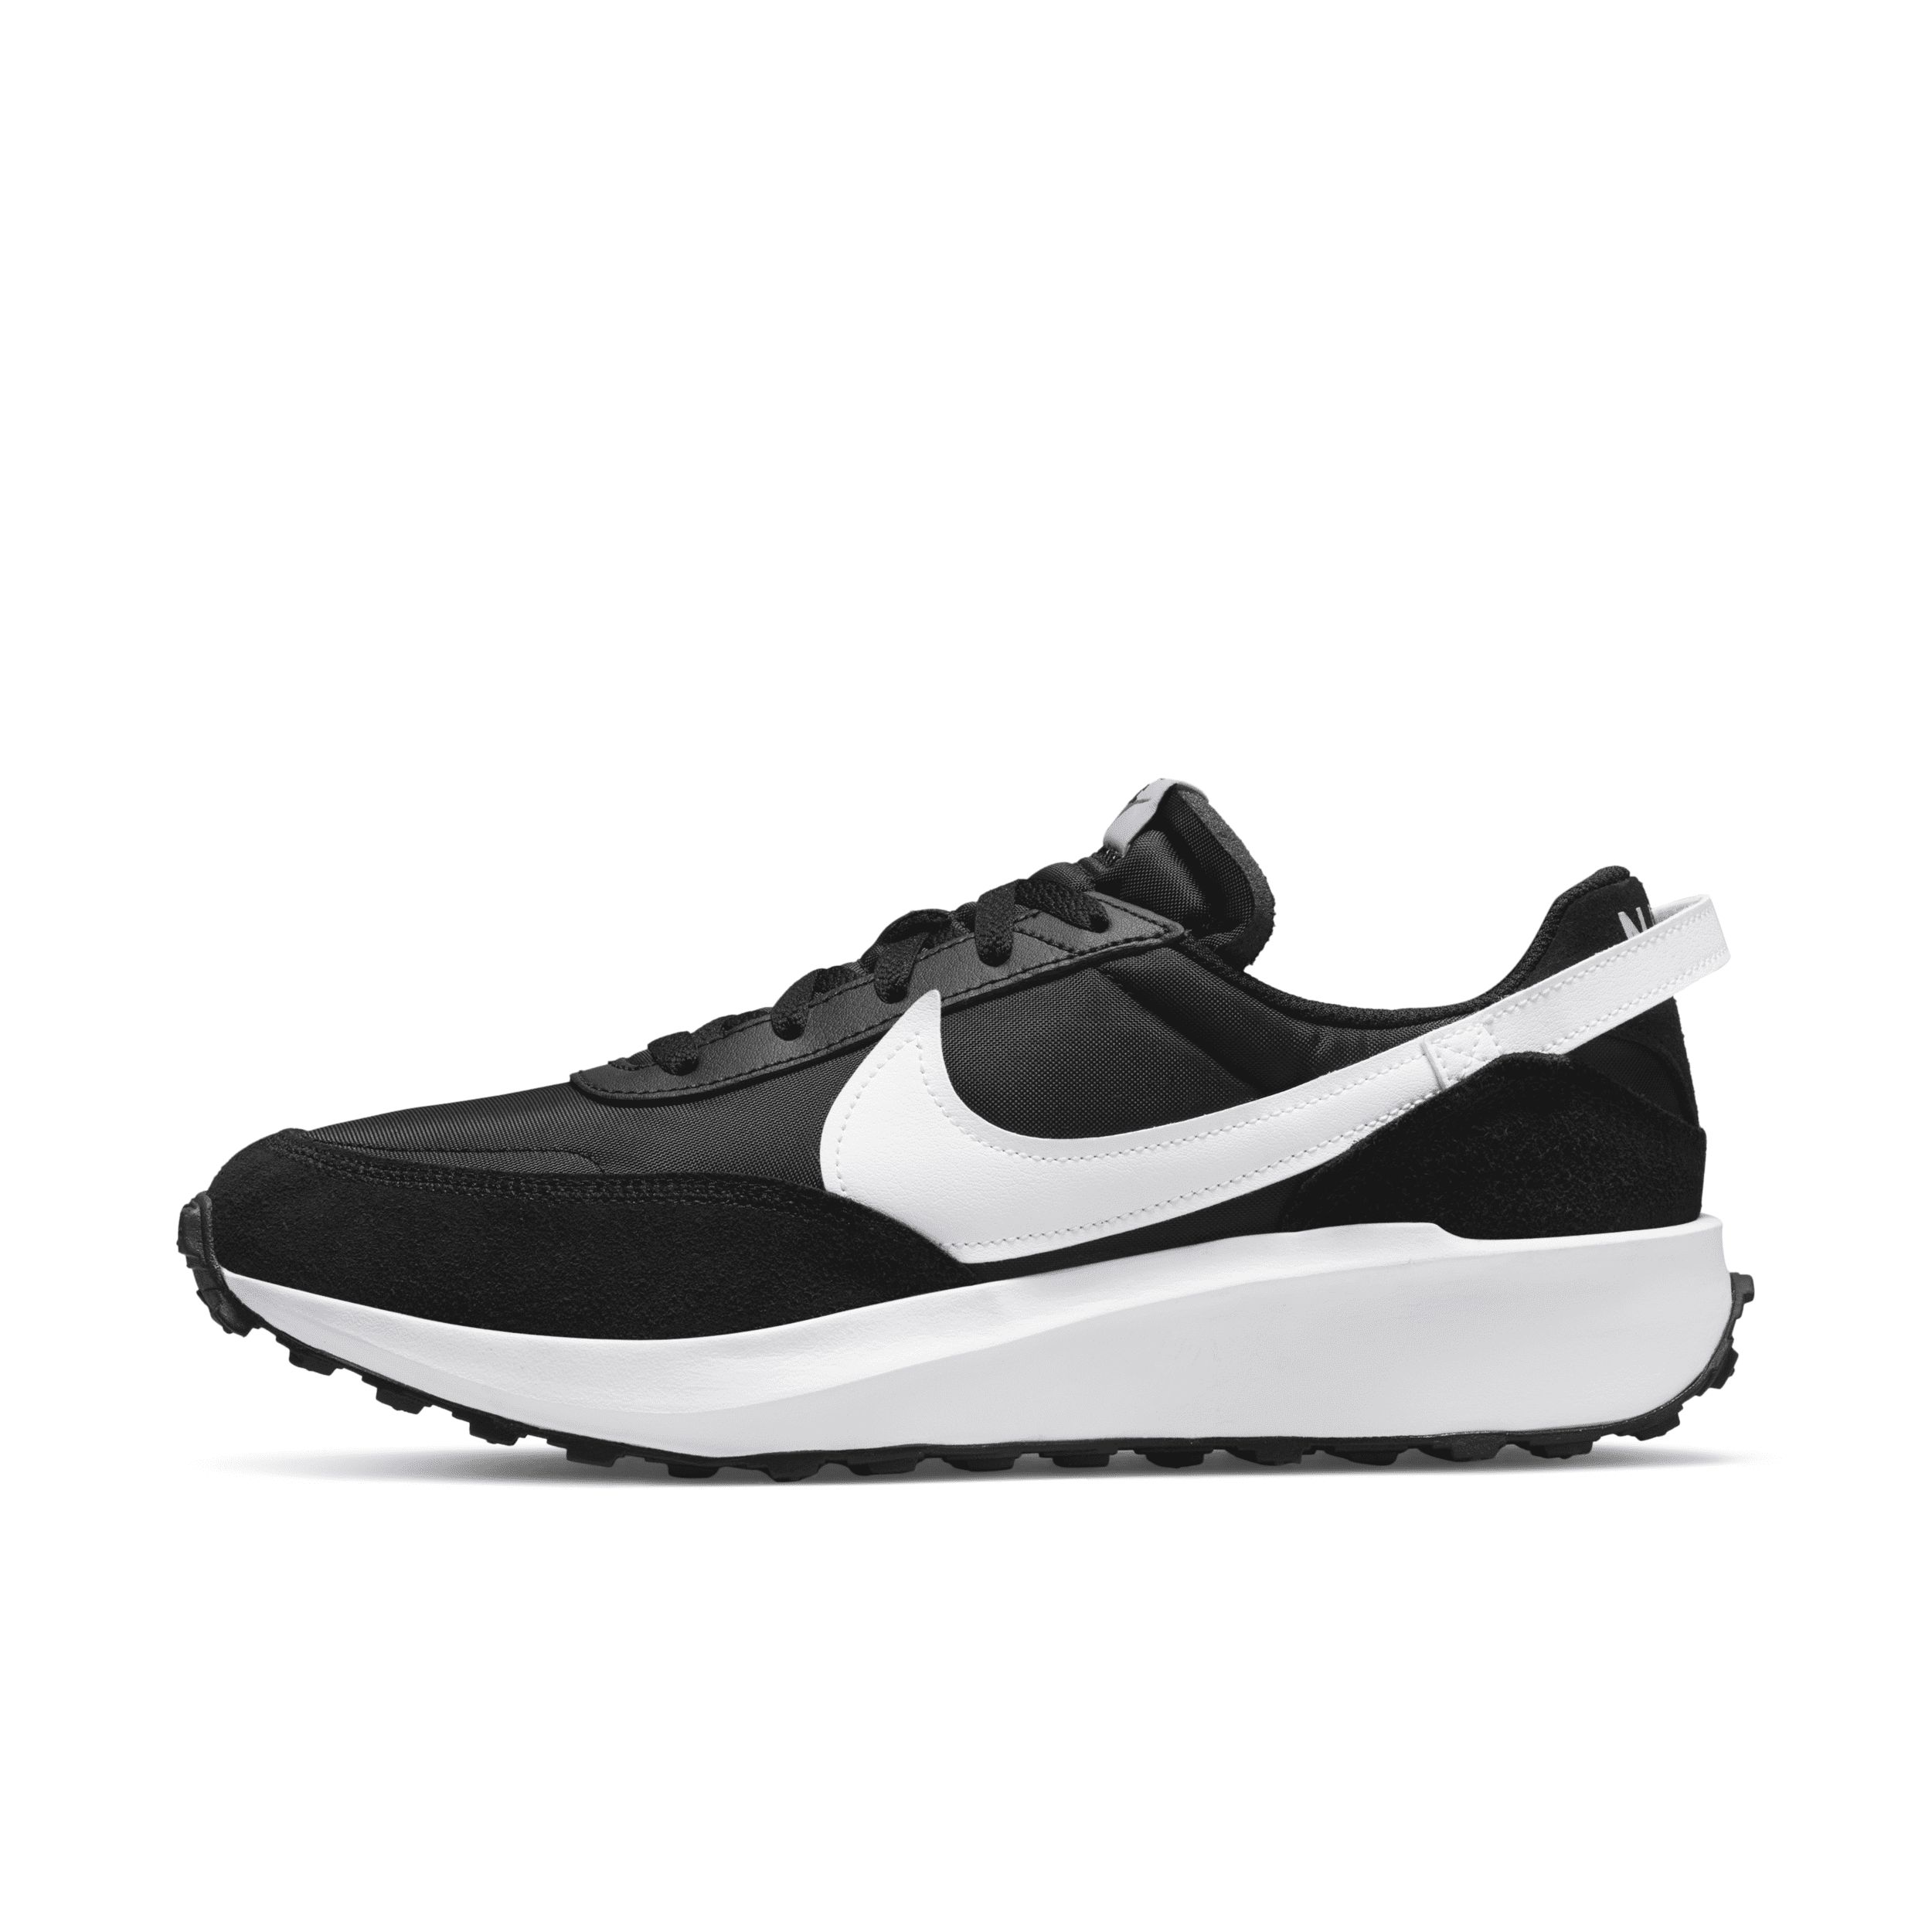 Nike Men's Waffle Debut Shoes in Black, Size: 10.5 | DH9522-001 | Nike (US)